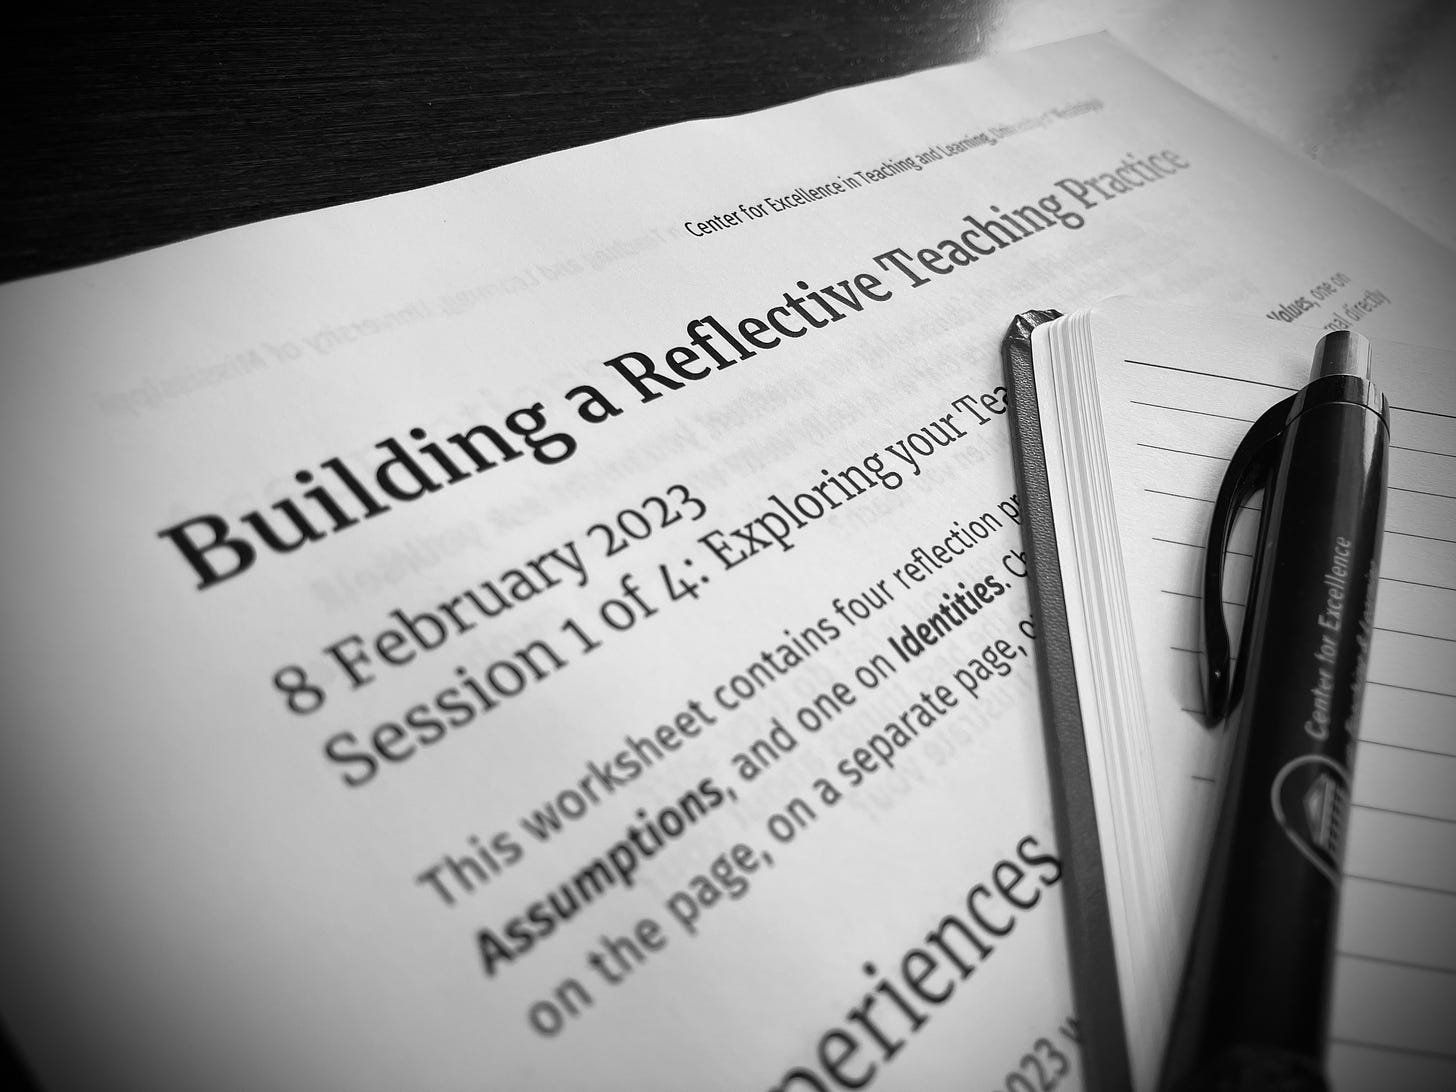 Black and white photograph of a worksheet titled "Building a reflective teaching practice," with a pen and notebook